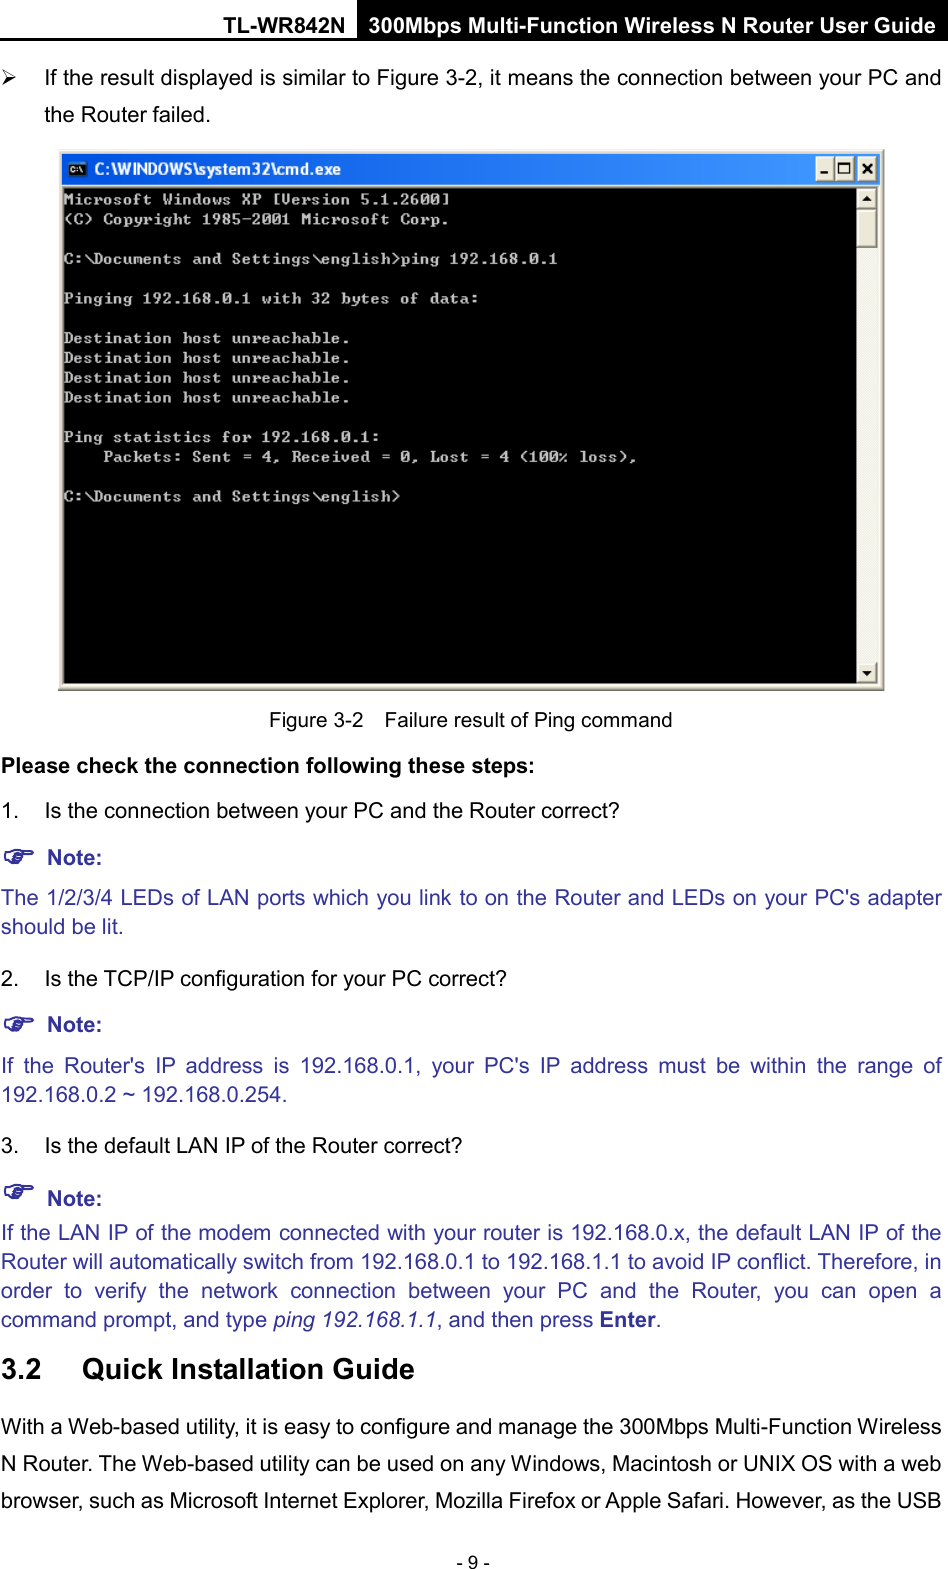 TL-WR842N 300Mbps Multi-Function Wireless N Router User Guide  - 9 -  If the result displayed is similar to Figure 3-2, it means the connection between your PC and the Router failed.    Figure 3-2  Failure result of Ping command Please check the connection following these steps: 1. Is the connection between your PC and the Router correct?  Note:   The 1/2/3/4 LEDs of LAN ports which you link to on the Router and LEDs on your PC&apos;s adapter should be lit. 2. Is the TCP/IP configuration for your PC correct?  Note:   If  the Router&apos;s IP address is 192.168.0.1, your PC&apos;s IP address must be within the range of 192.168.0.2 ~ 192.168.0.254. 3. Is the default LAN IP of the Router correct?  Note:   If the LAN IP of the modem connected with your router is 192.168.0.x, the default LAN IP of the Router will automatically switch from 192.168.0.1 to 192.168.1.1 to avoid IP conflict. Therefore, in order to verify the network connection between your PC and the Router,  you can open a command prompt, and type ping 192.168.1.1, and then press Enter. 3.2  Quick Installation Guide With a Web-based utility, it is easy to configure and manage the 300Mbps Multi-Function Wireless N Router. The Web-based utility can be used on any Windows, Macintosh or UNIX OS with a web browser, such as Microsoft Internet Explorer, Mozilla Firefox or Apple Safari. However, as the USB 